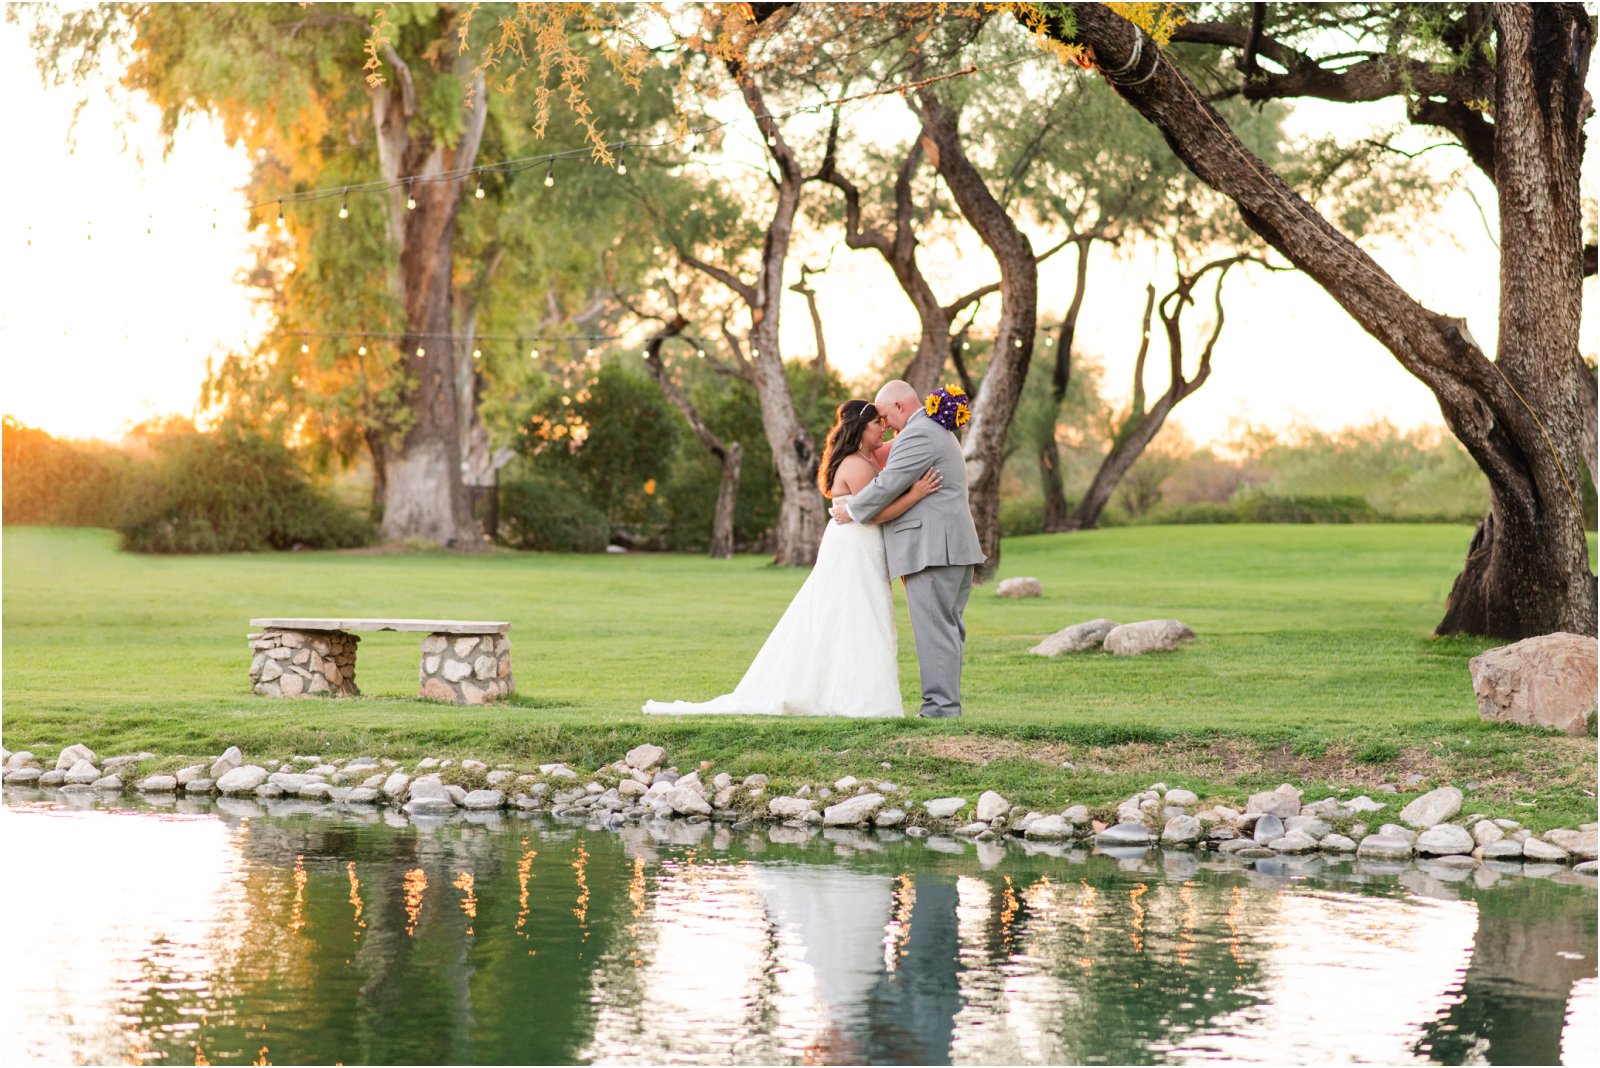 Bride and Groom portrait by pond at La Mariposa in Tucson, AZ by Christy Hunter Photography